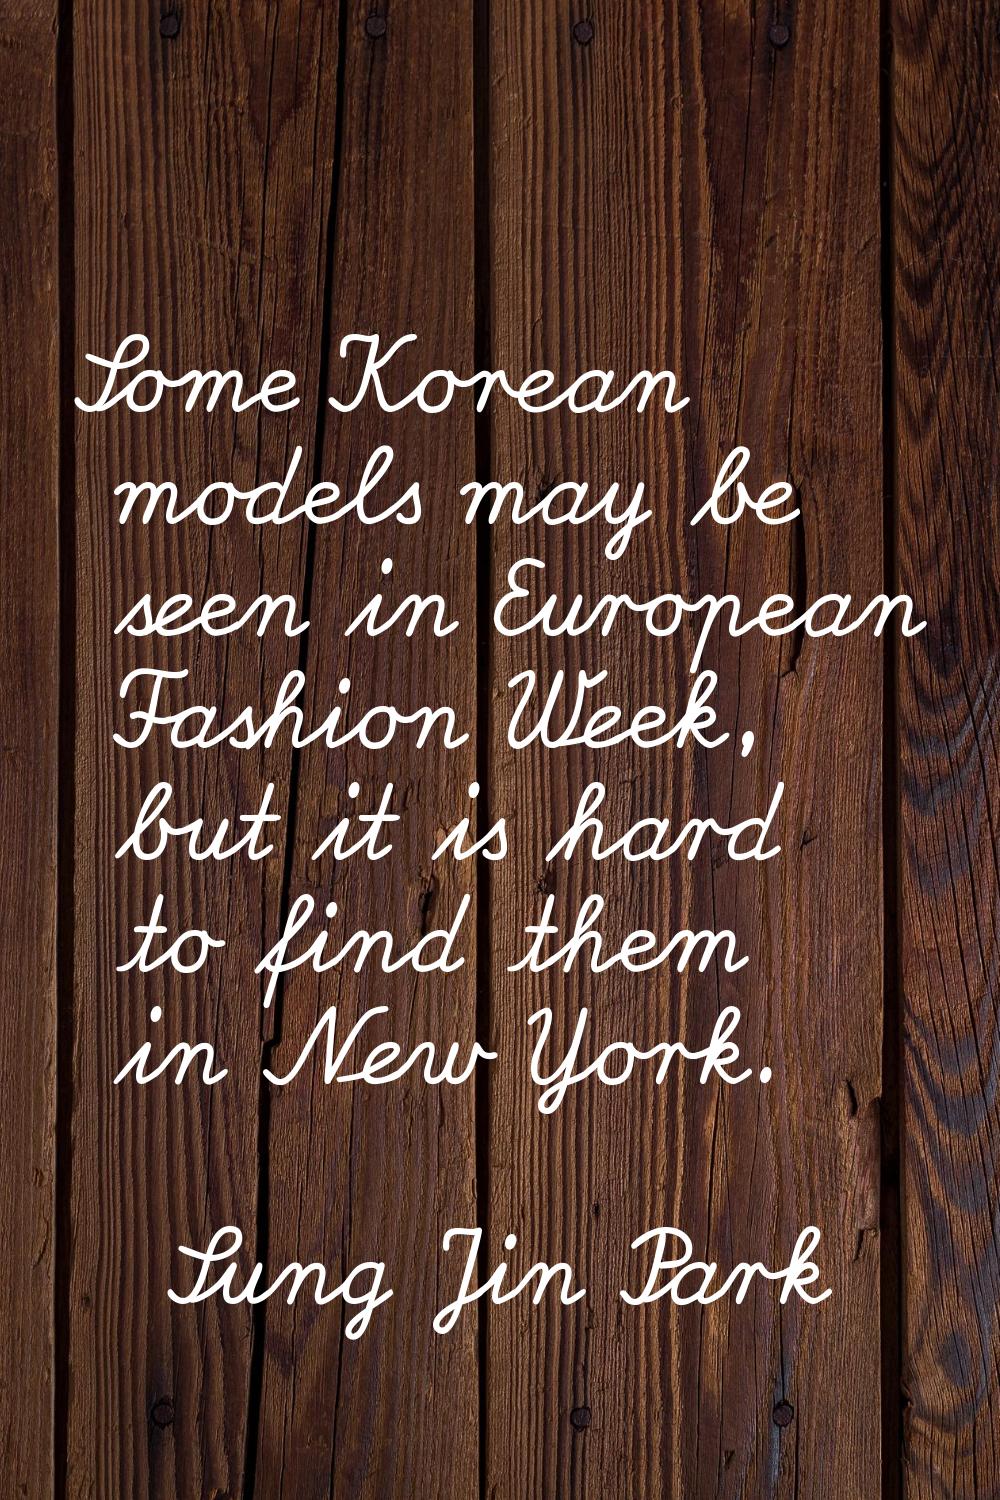 Some Korean models may be seen in European Fashion Week, but it is hard to find them in New York.